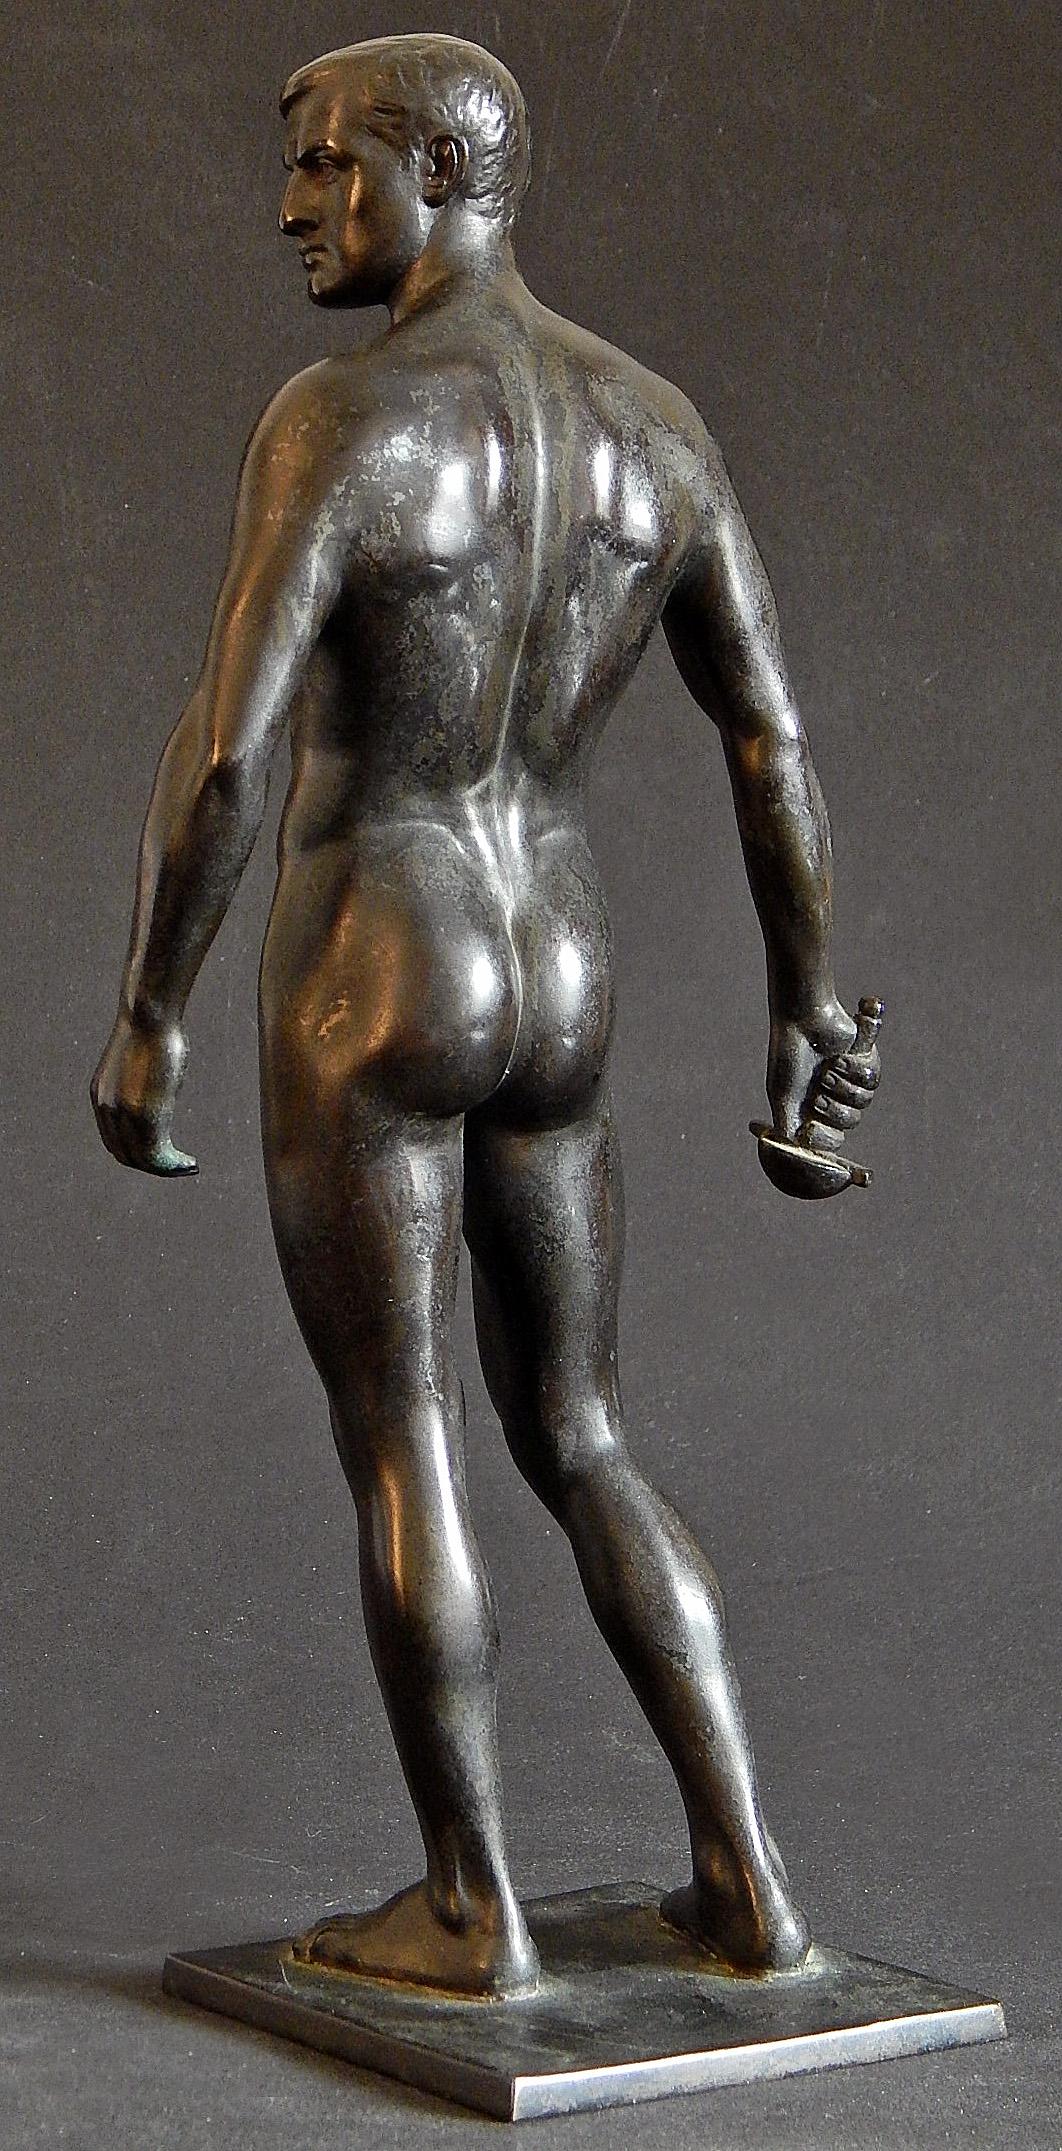 Beautifully modeled and detailed, this bronze sculpture of a nude male figure holding the hilt of a sword was created by Oscar Bodin, a German sculptor active in the early twentieth century (the figure is holding the hilt of the sword, but the blade